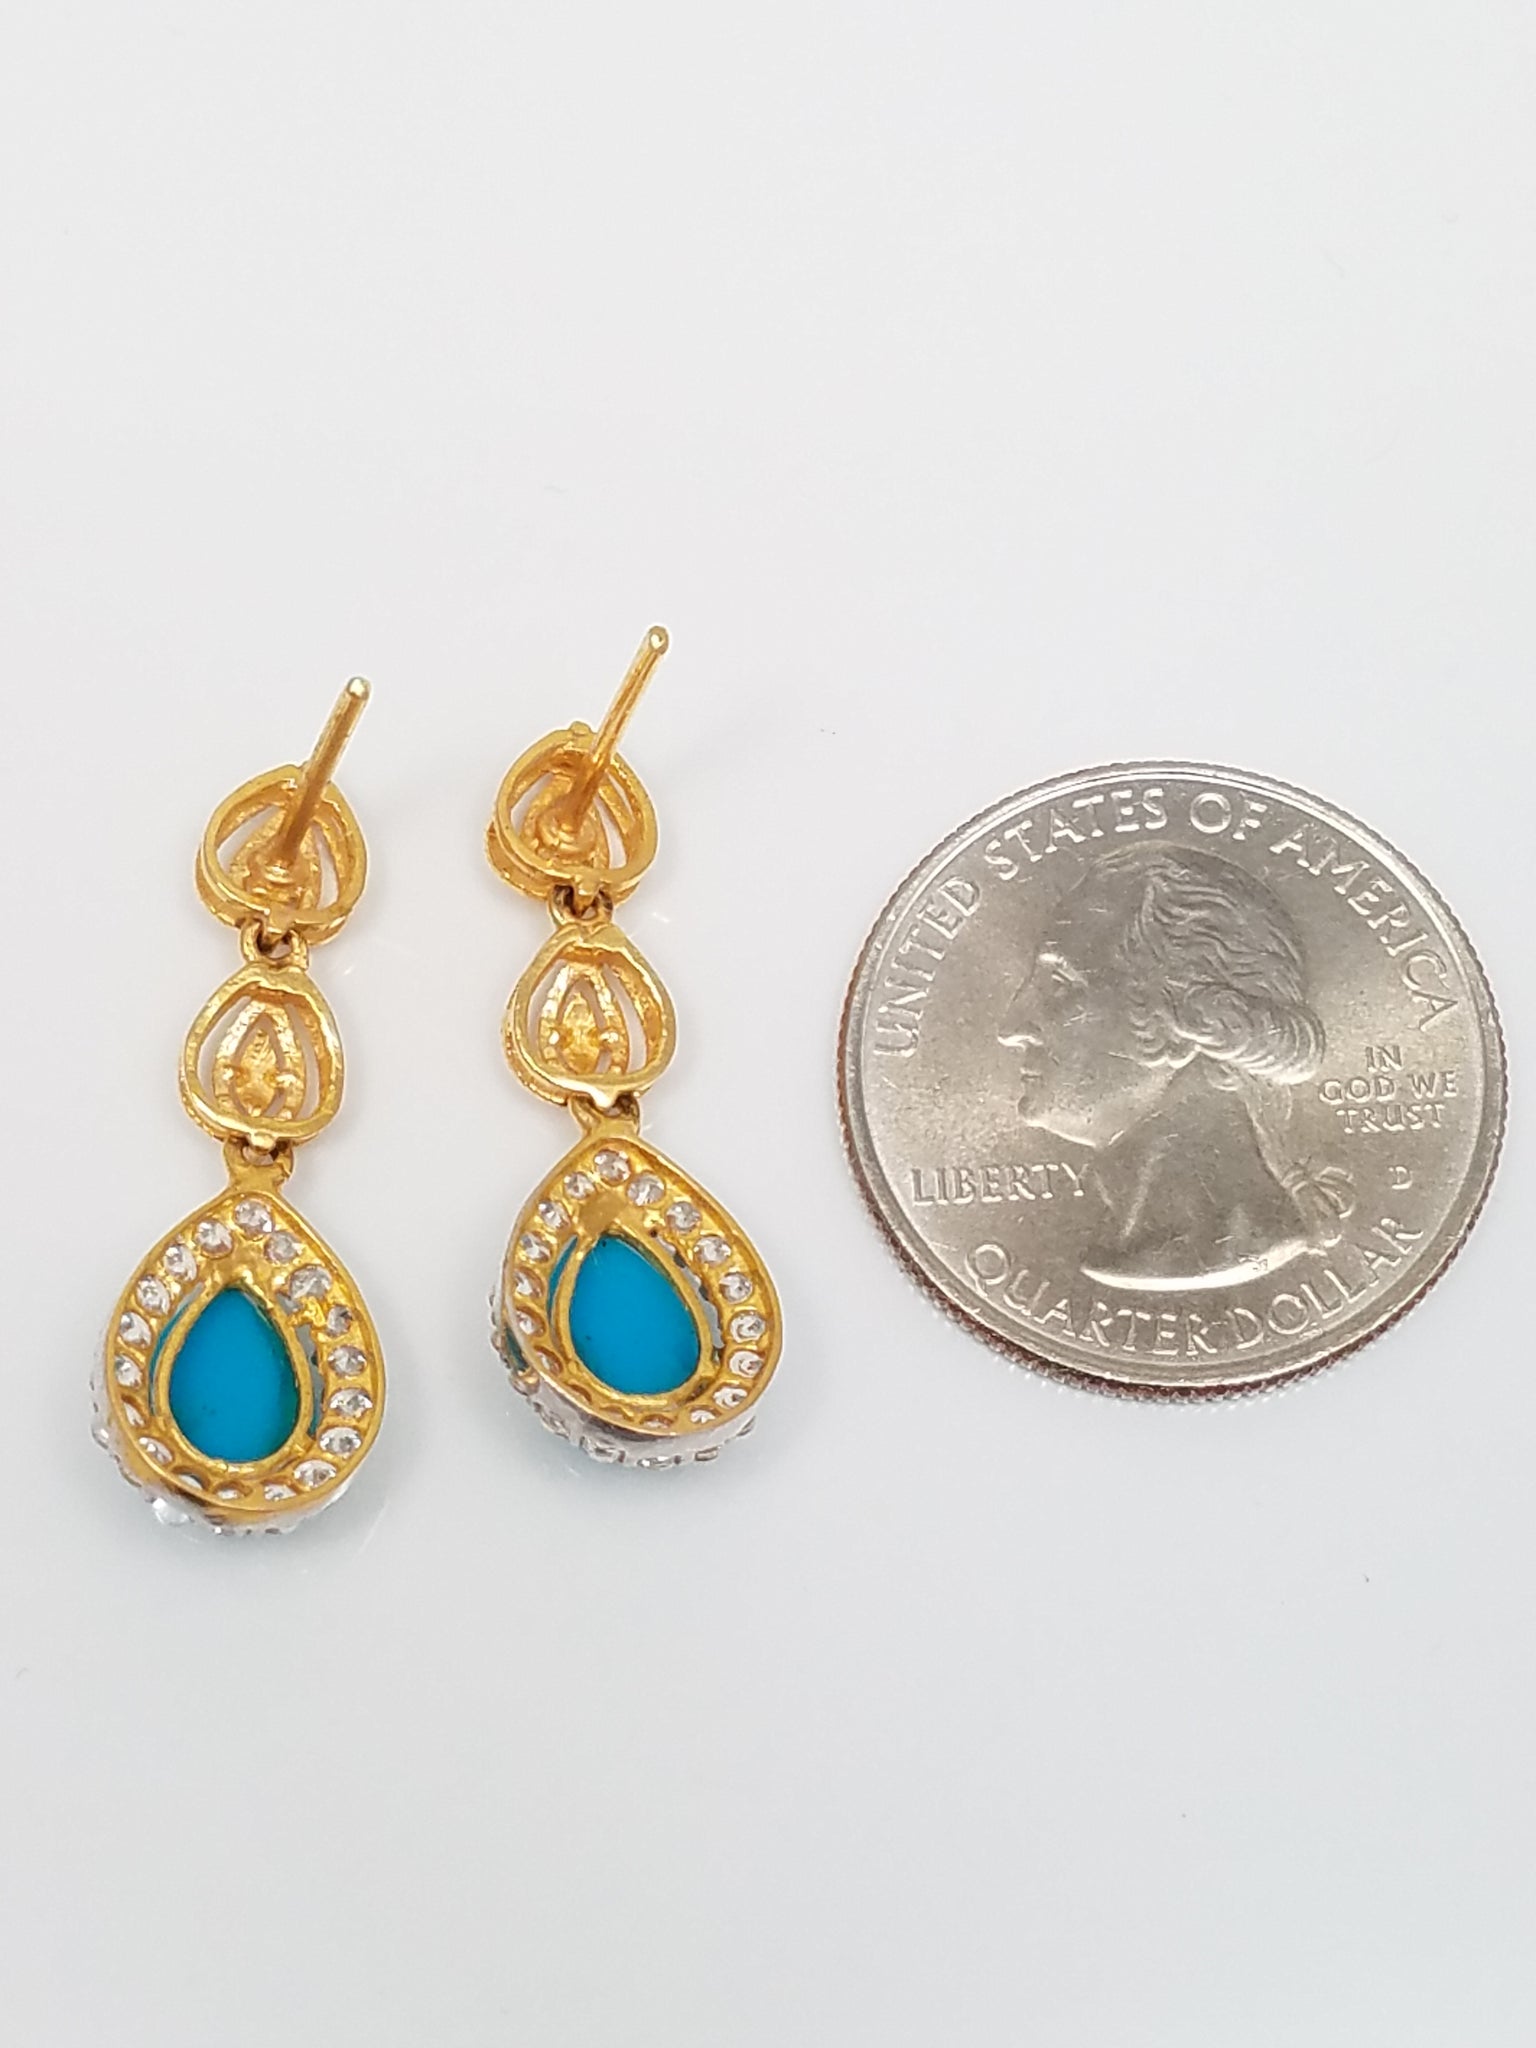 22k Yellow Gold Turquoise Necklace Earring Set